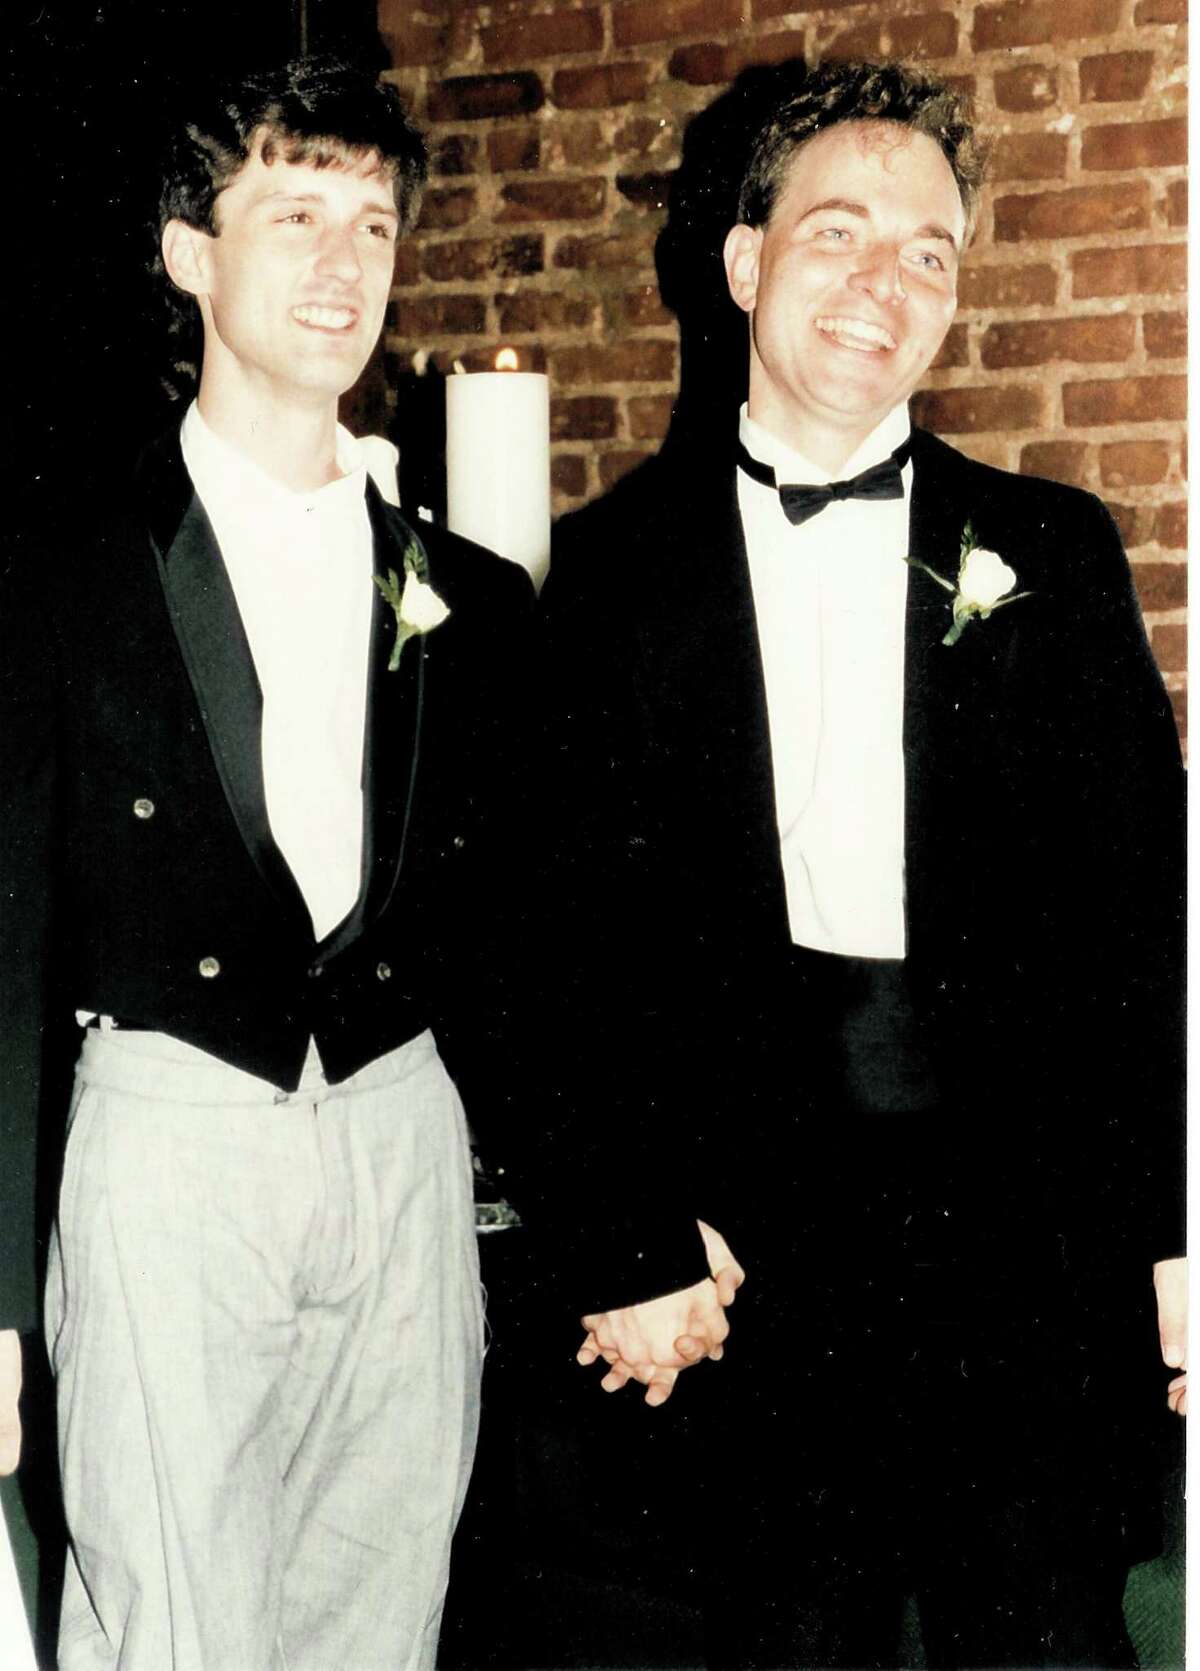 Brian Fisher (left) and Kevin Fisher-Paulson get married for the first time on Sept. 19, 1987, in New York City.